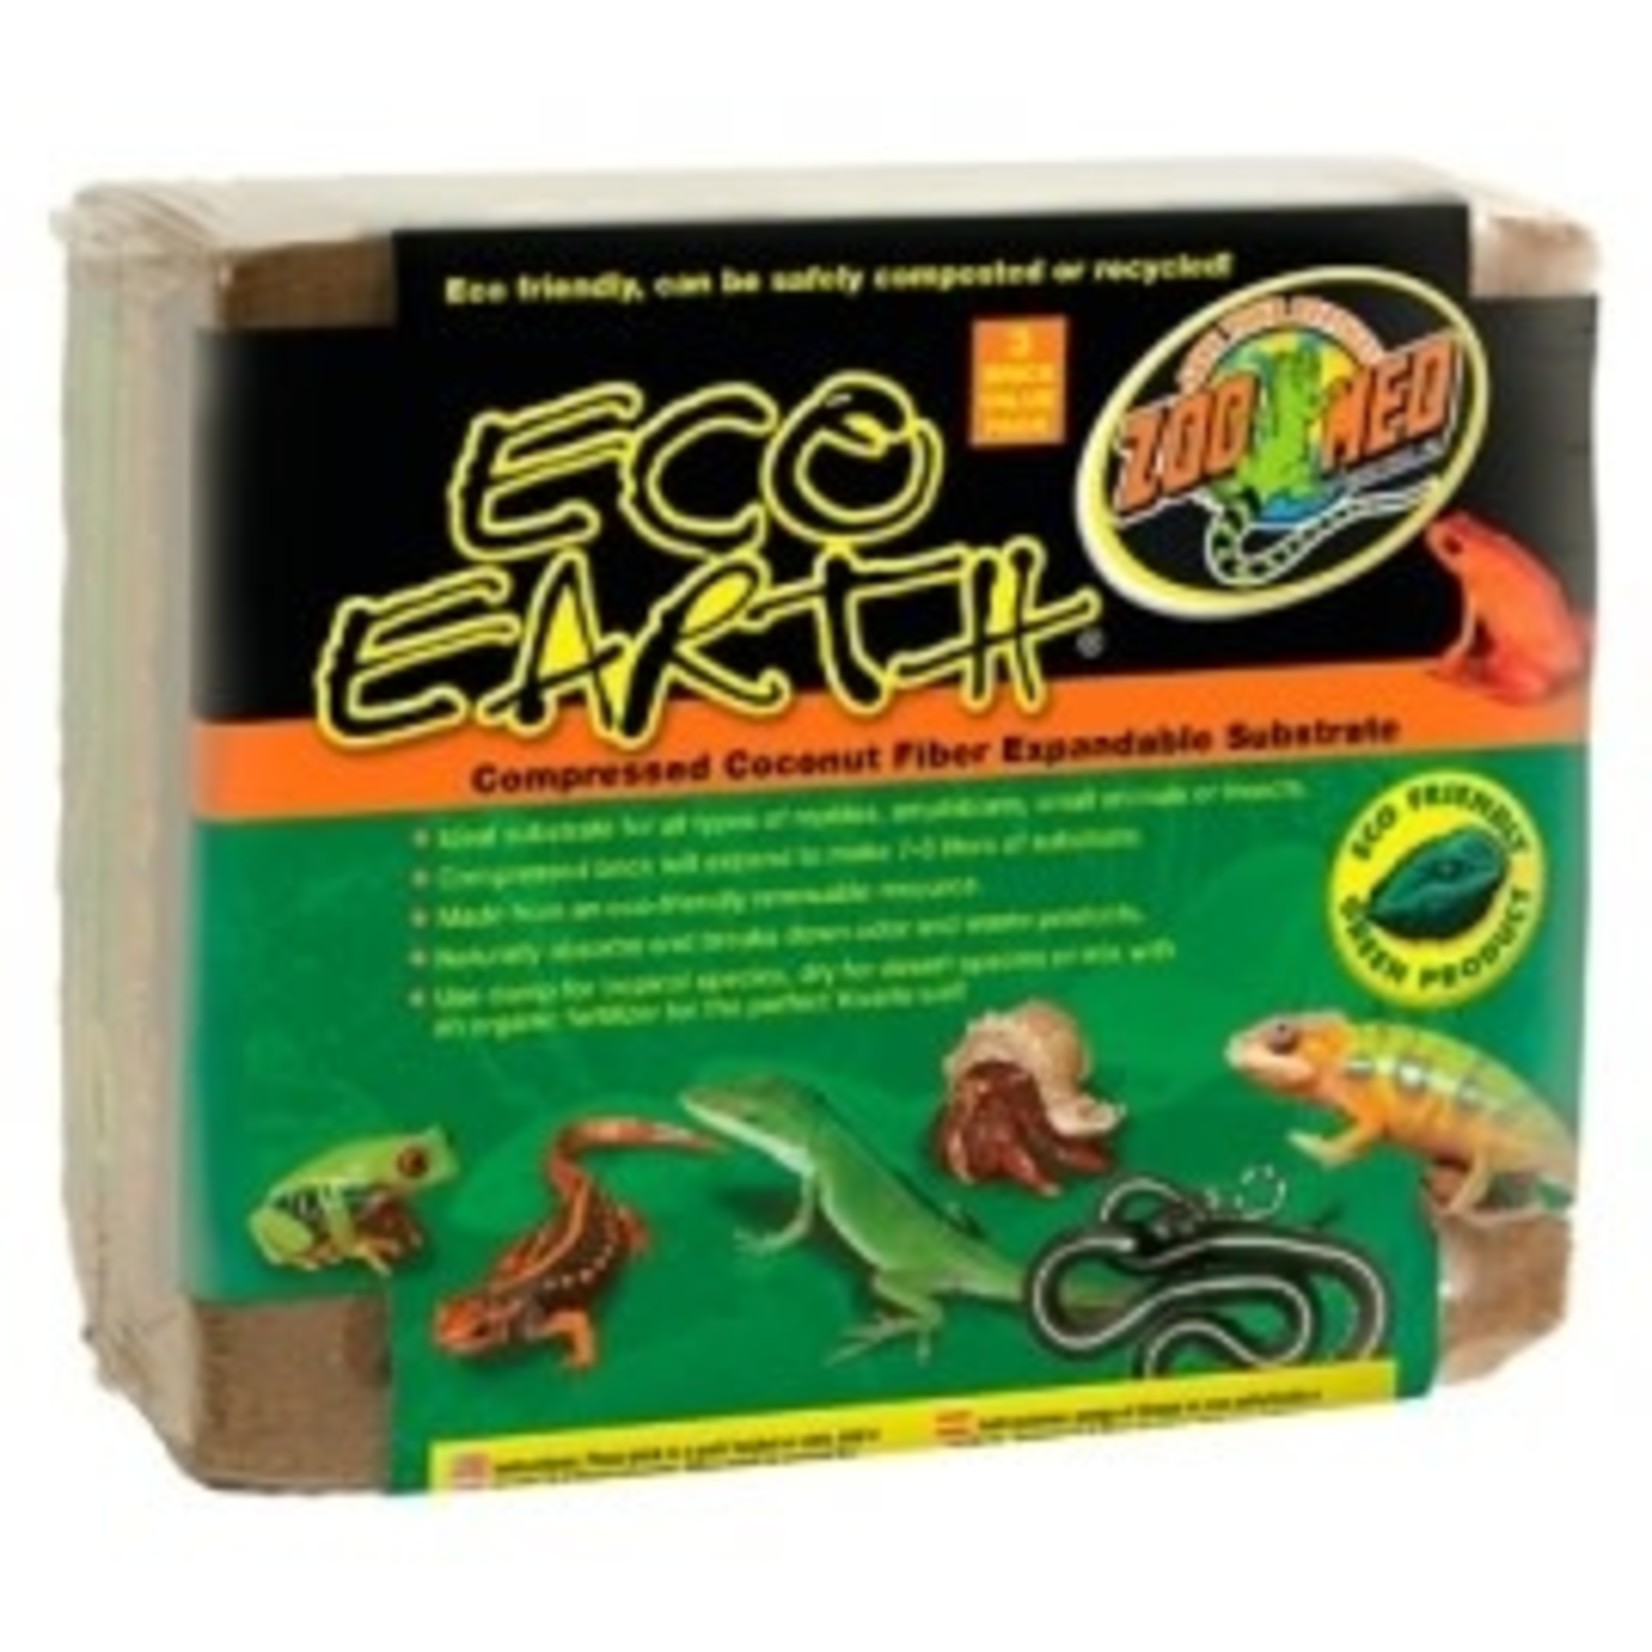 Zoomed Eco Earth 3 pack (2+ 1 offert) Coco compressé